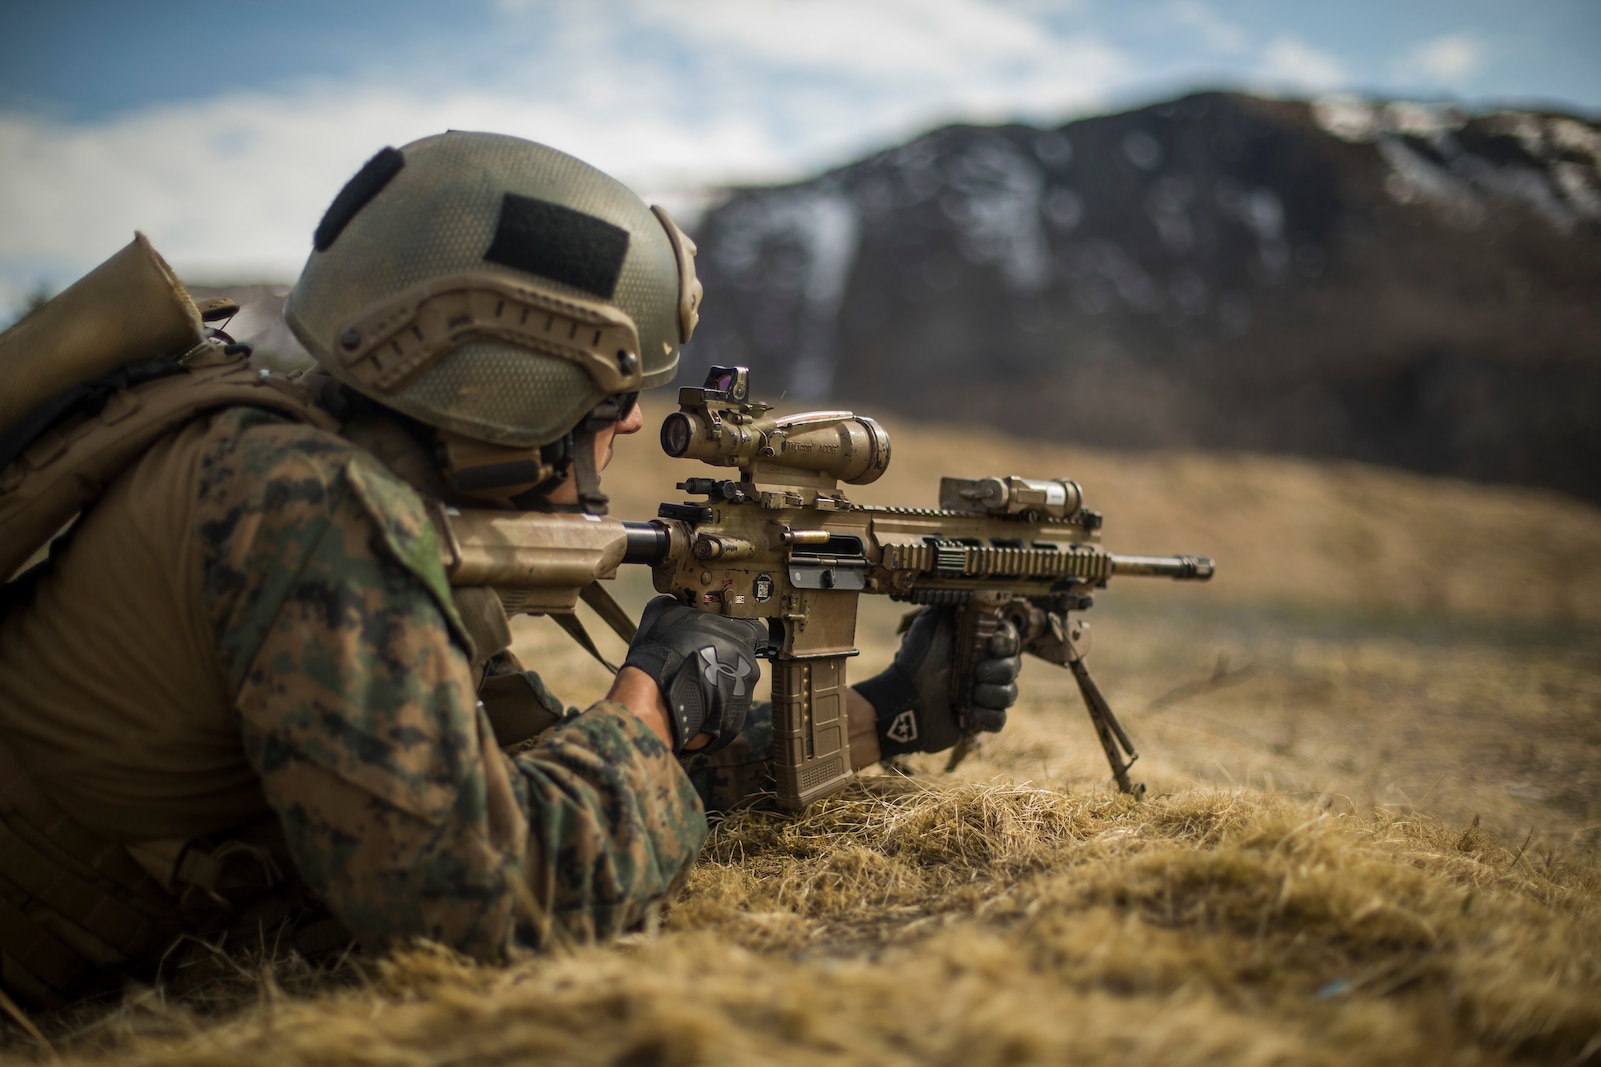 A U.S. Marine with 1st Platoon, 1st Reconnaissance Battalion, 1st Marine Division, returns fire while conducting a live fire range and patrol, during Exercise Platinum Ren, at Fort Trondennes, Harstad, Norway, May 11, 2018.